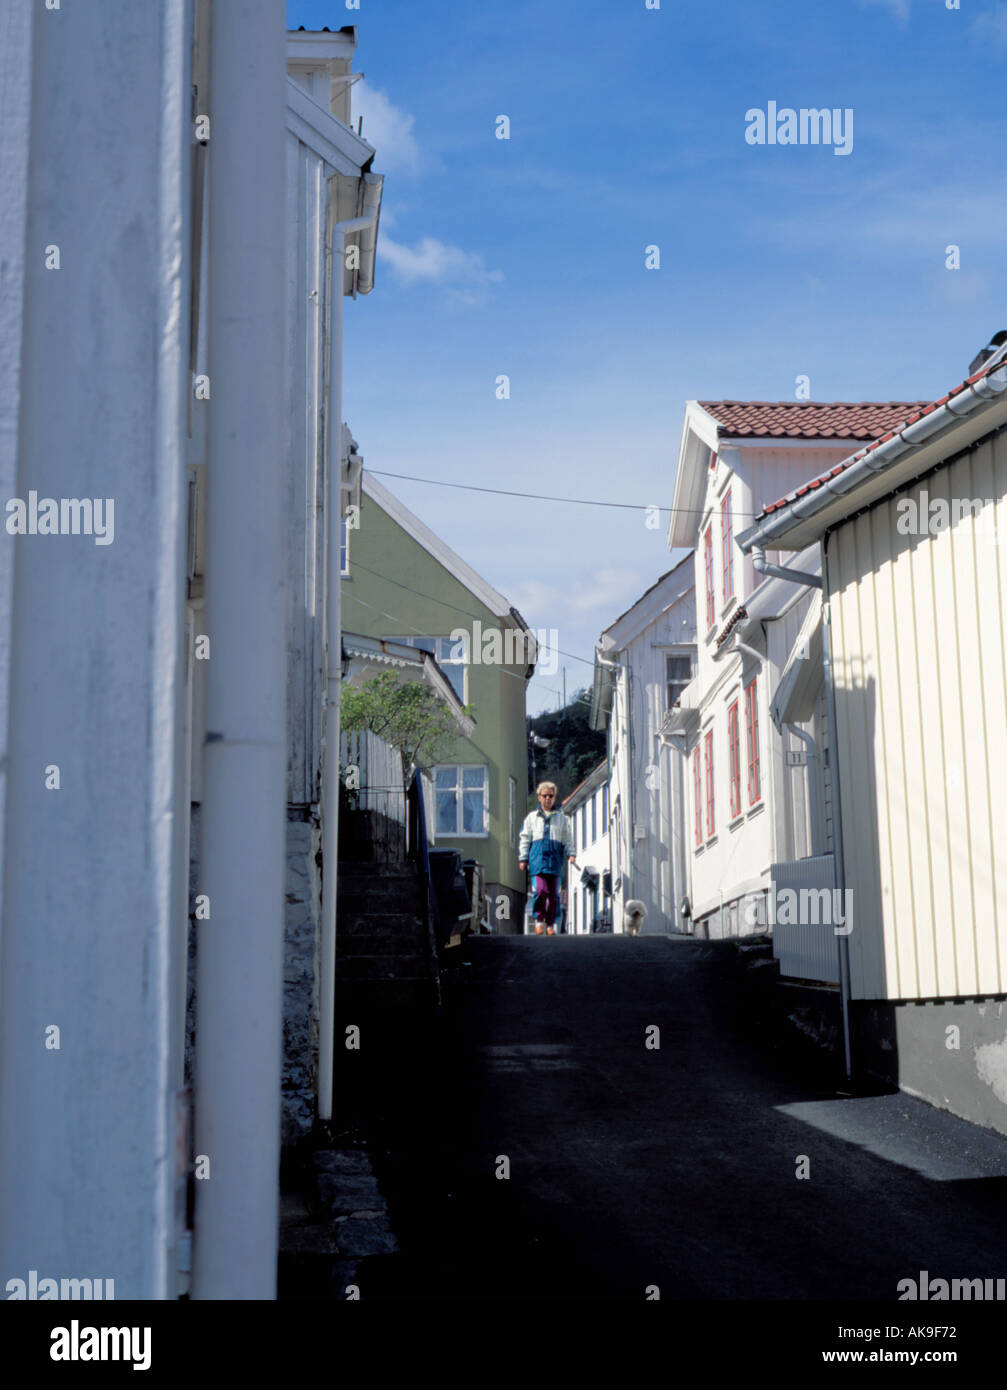 Picturesque white painted old timber houses in a back street, Kragerø, Telemark, Norway. Stock Photo